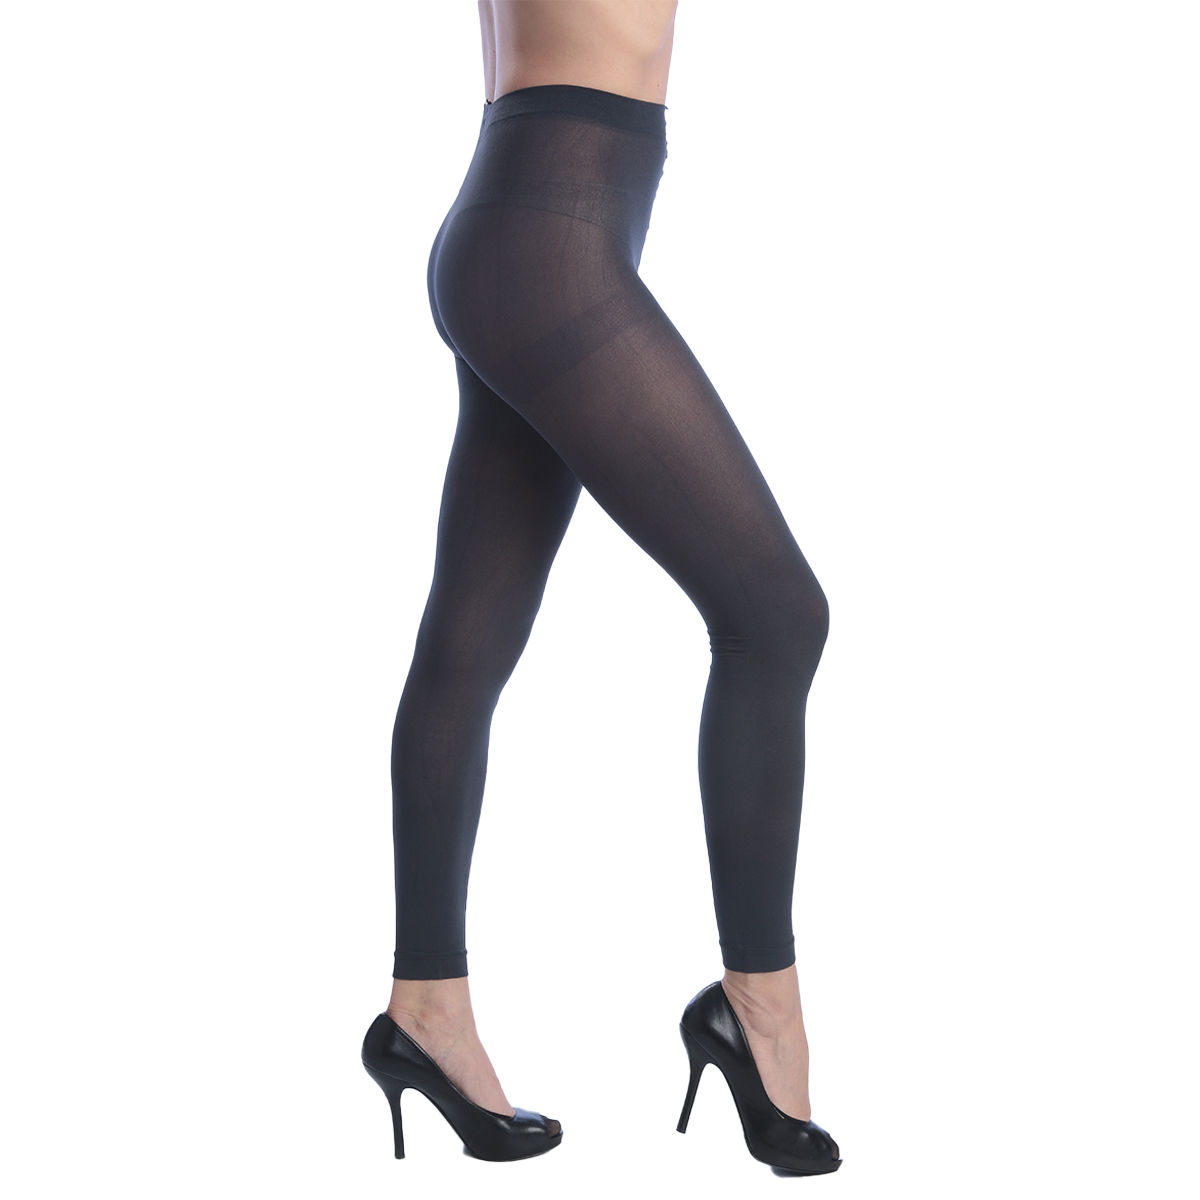 Women's Opaque Control Top Footless Tights - Charcoal, One Size Fits Most